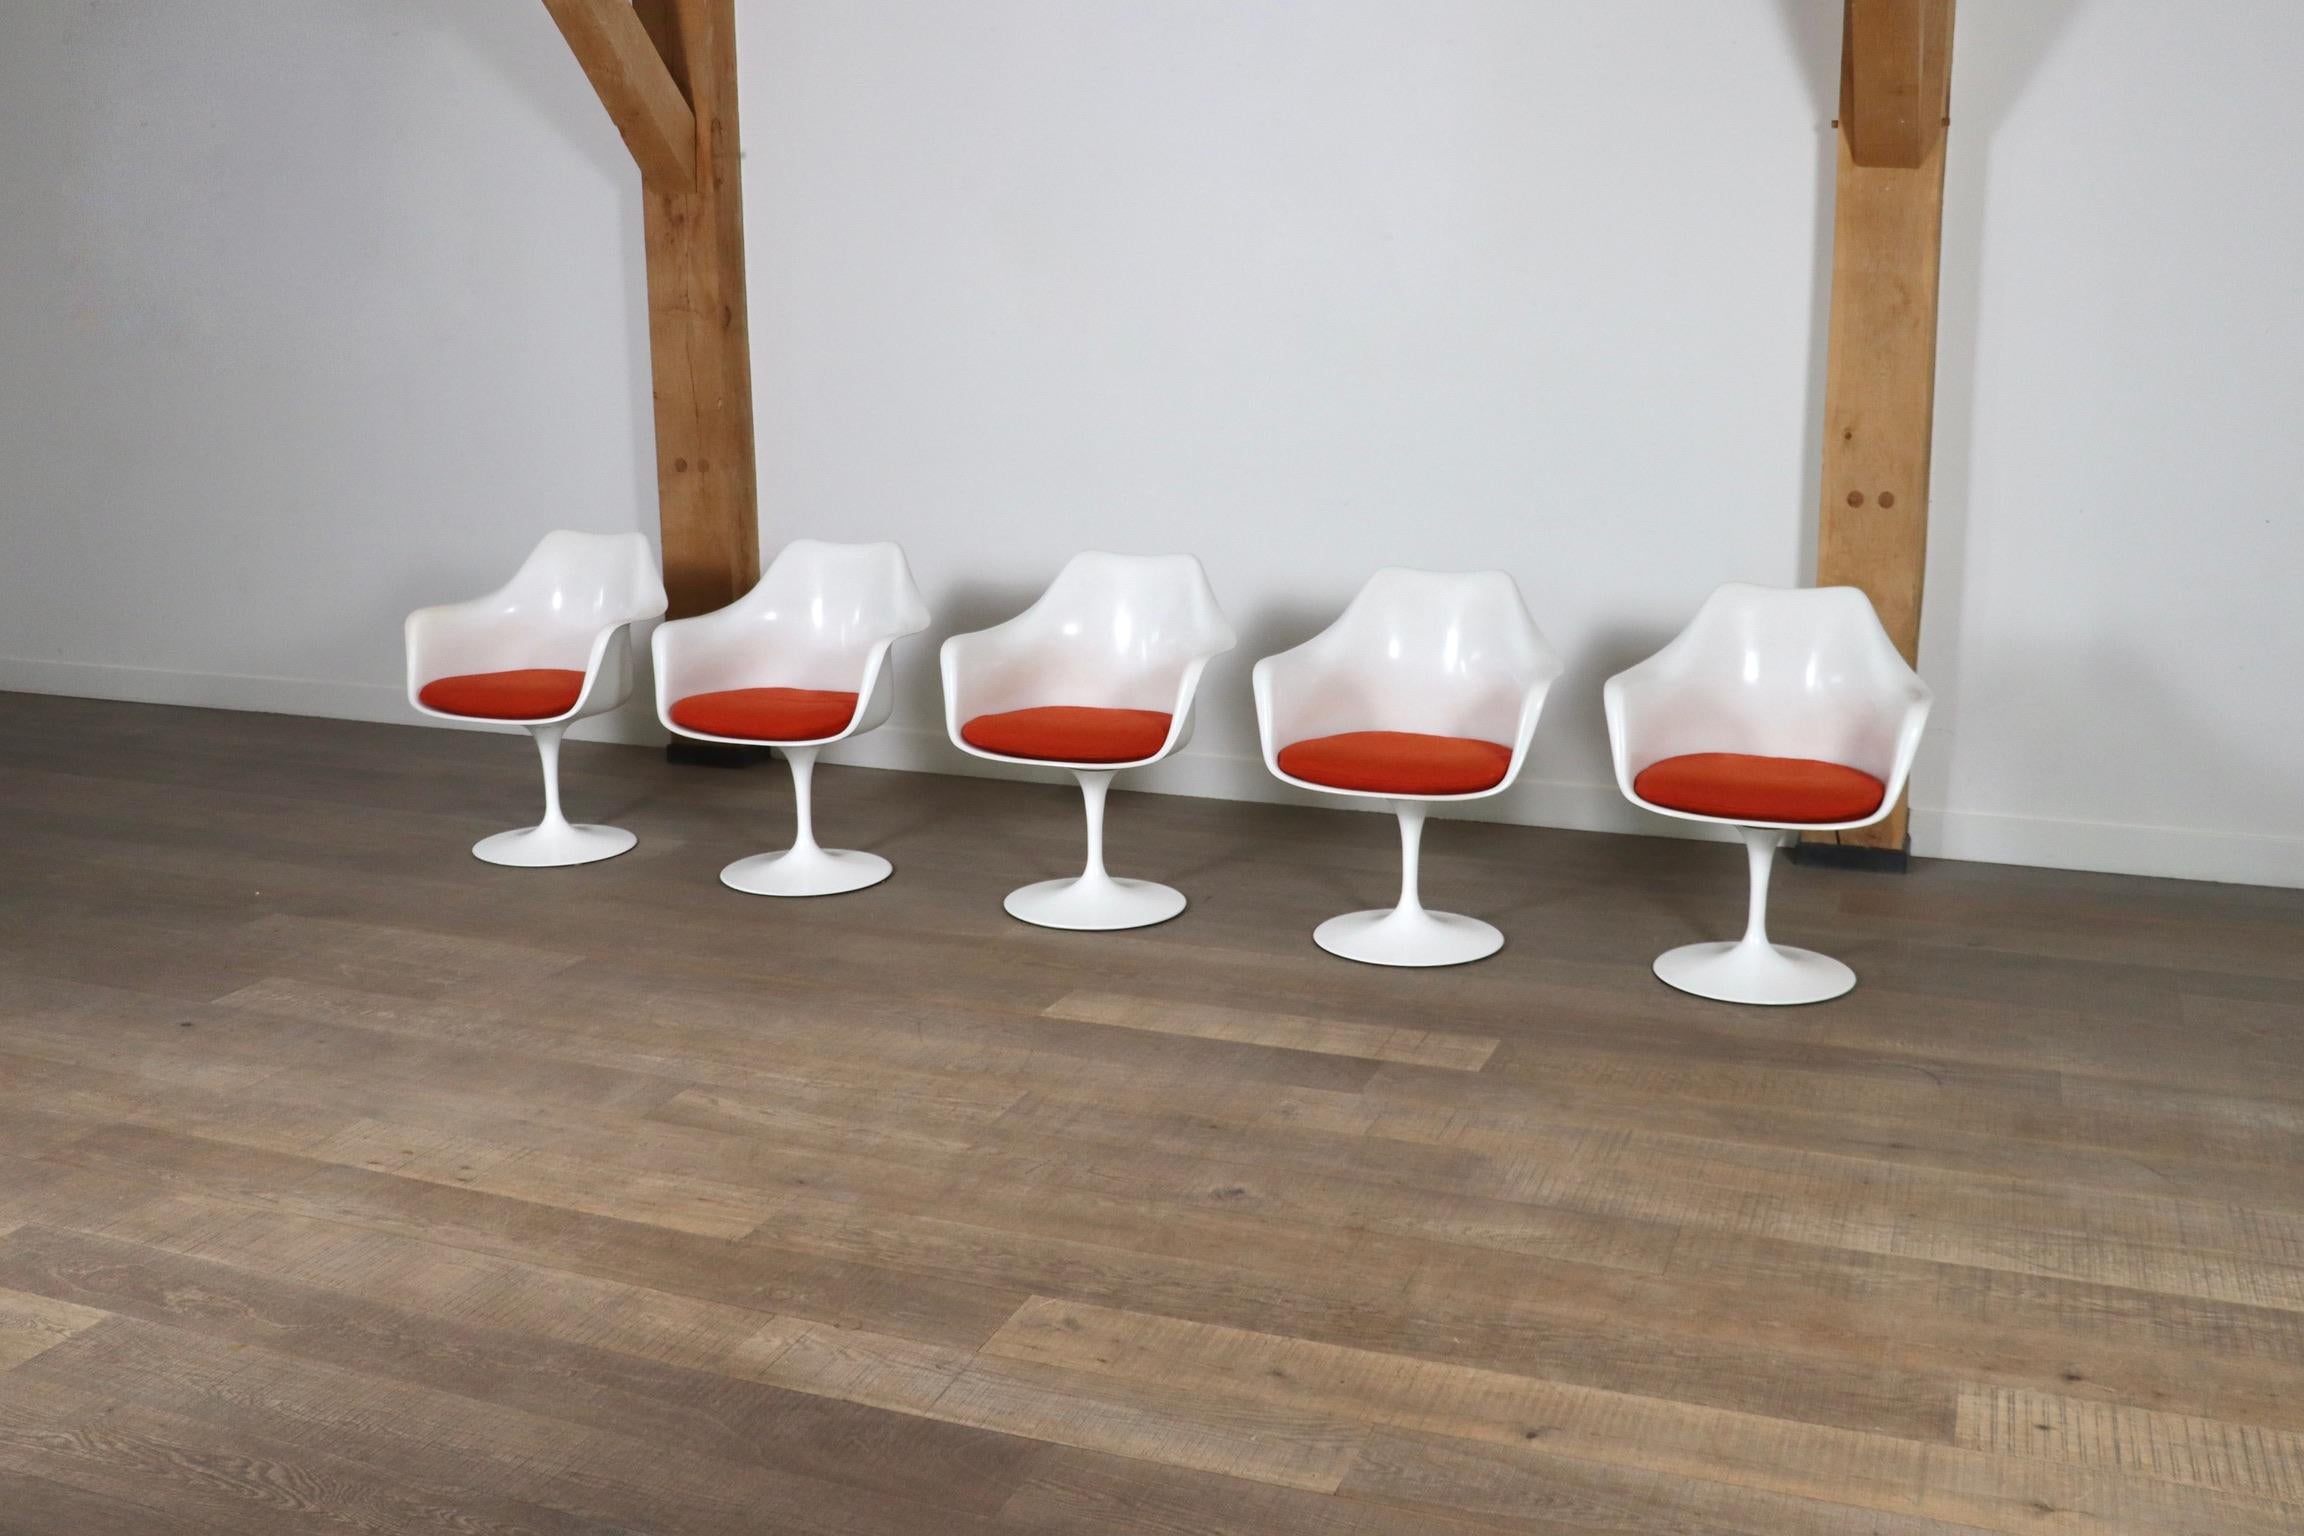 Amazing set of 5 Tulip chairs in original burnt orange upholstery by great designer Eero Saarinen, 1970s. This particular set has three fixes chairs and two chairs with a swivel base. The chairs are marked with the Knoll sticker. This timeless